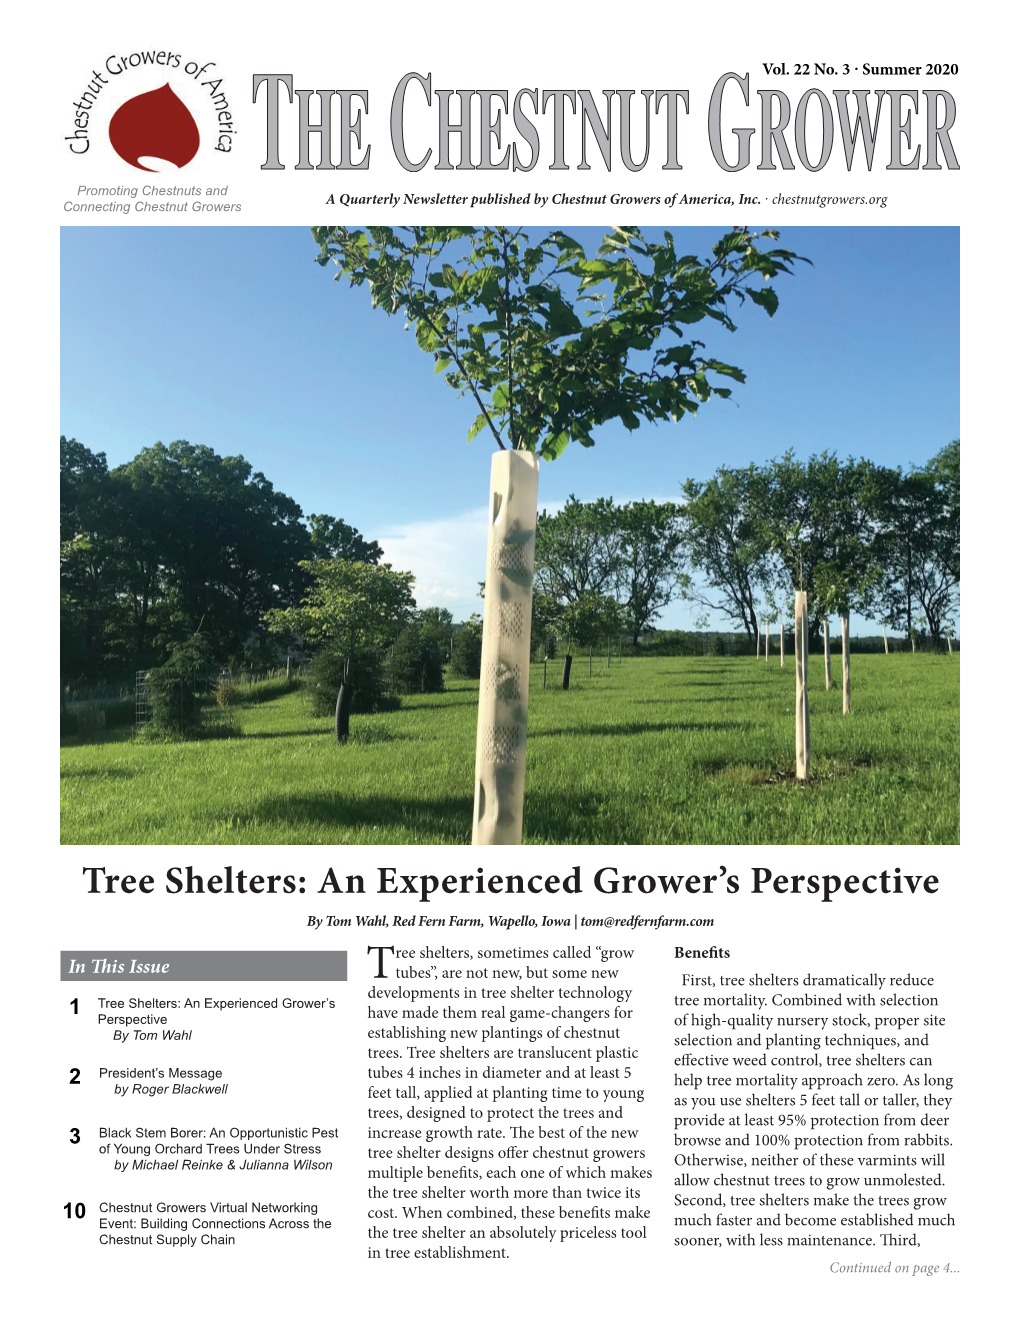 Tree Shelters